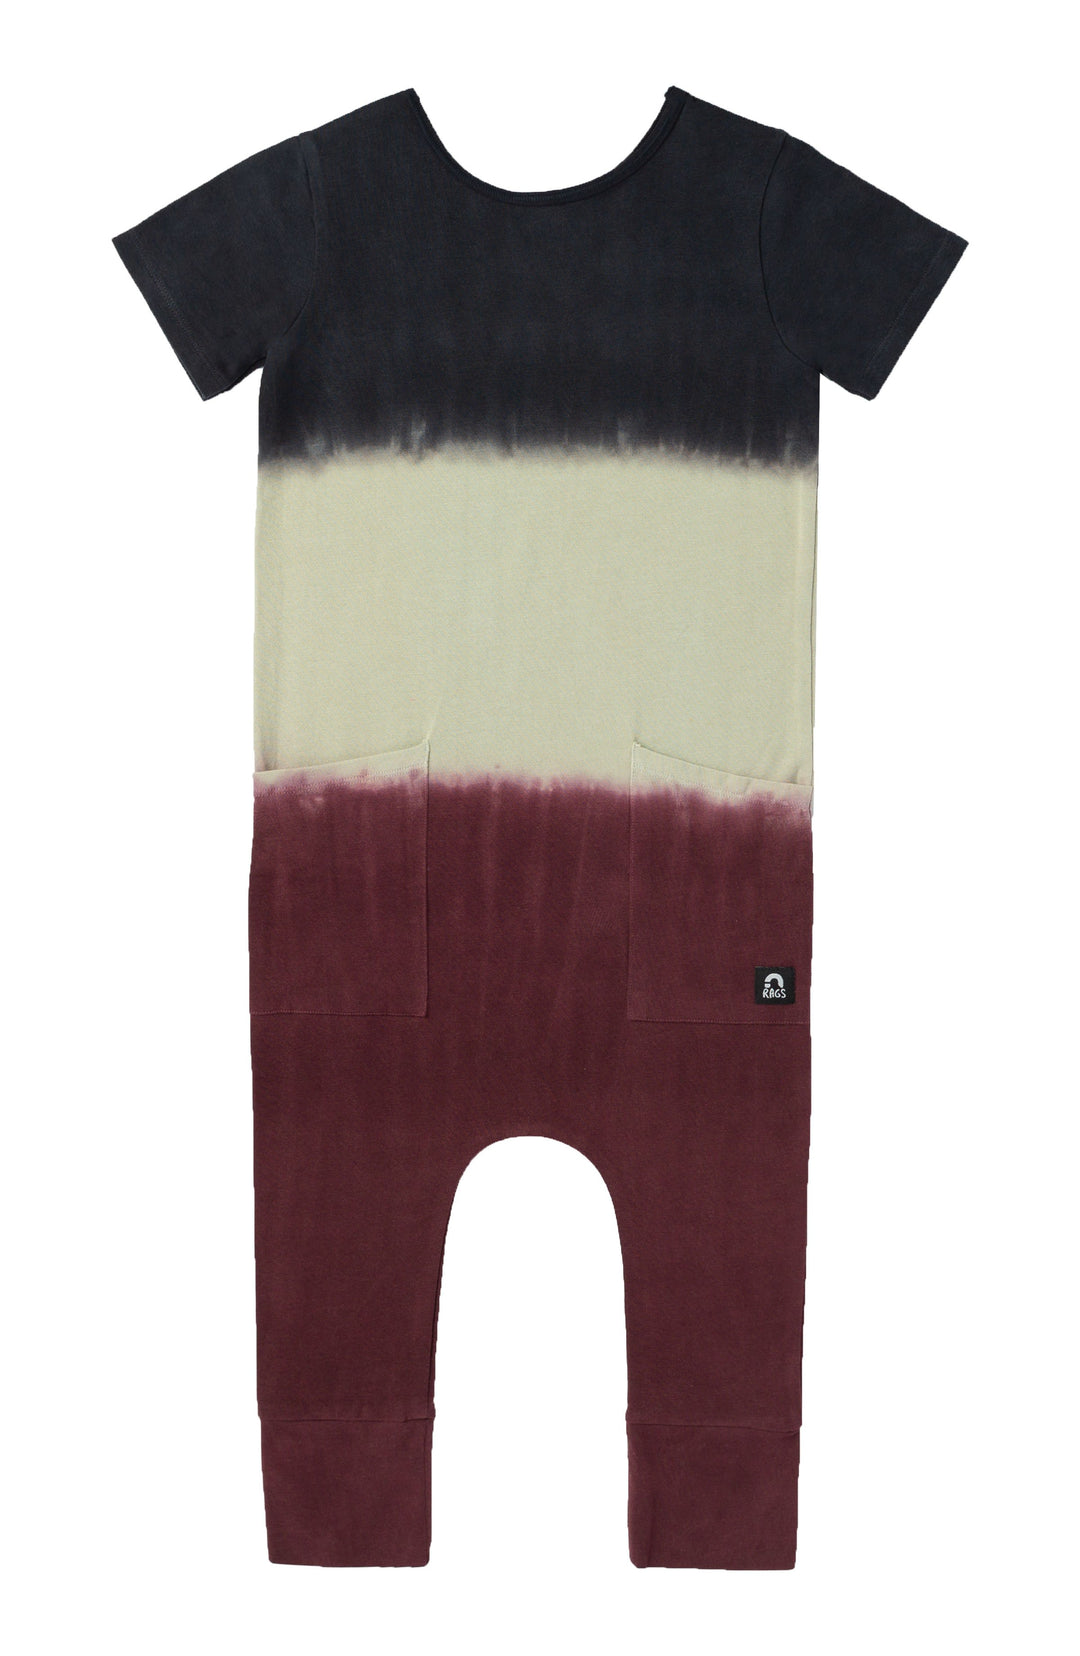 Rags to Raches Dip Dye romper in black, cream, and maroon